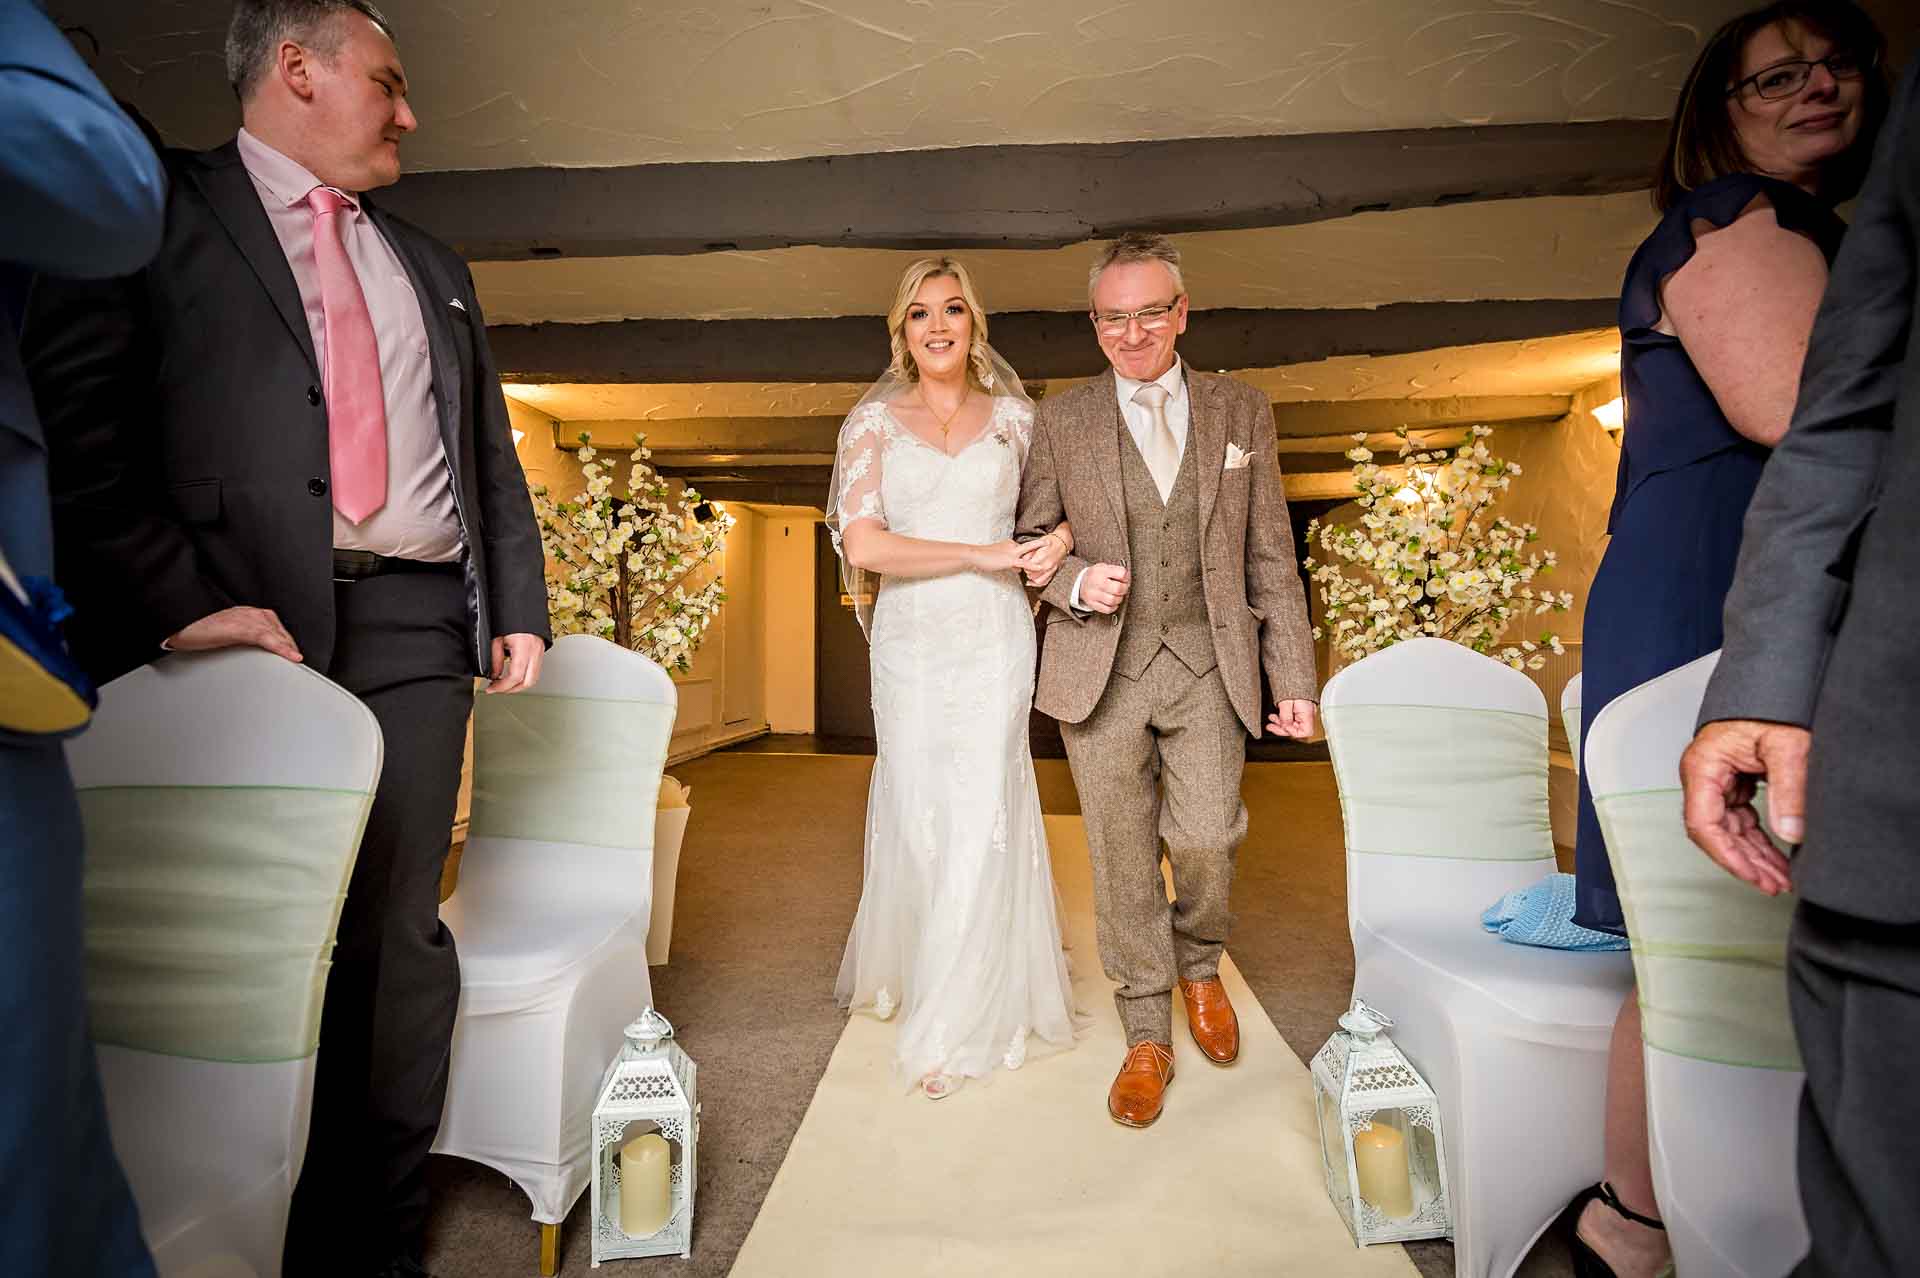 The bride and father walk down aisle at Llechwen Hall Hotel